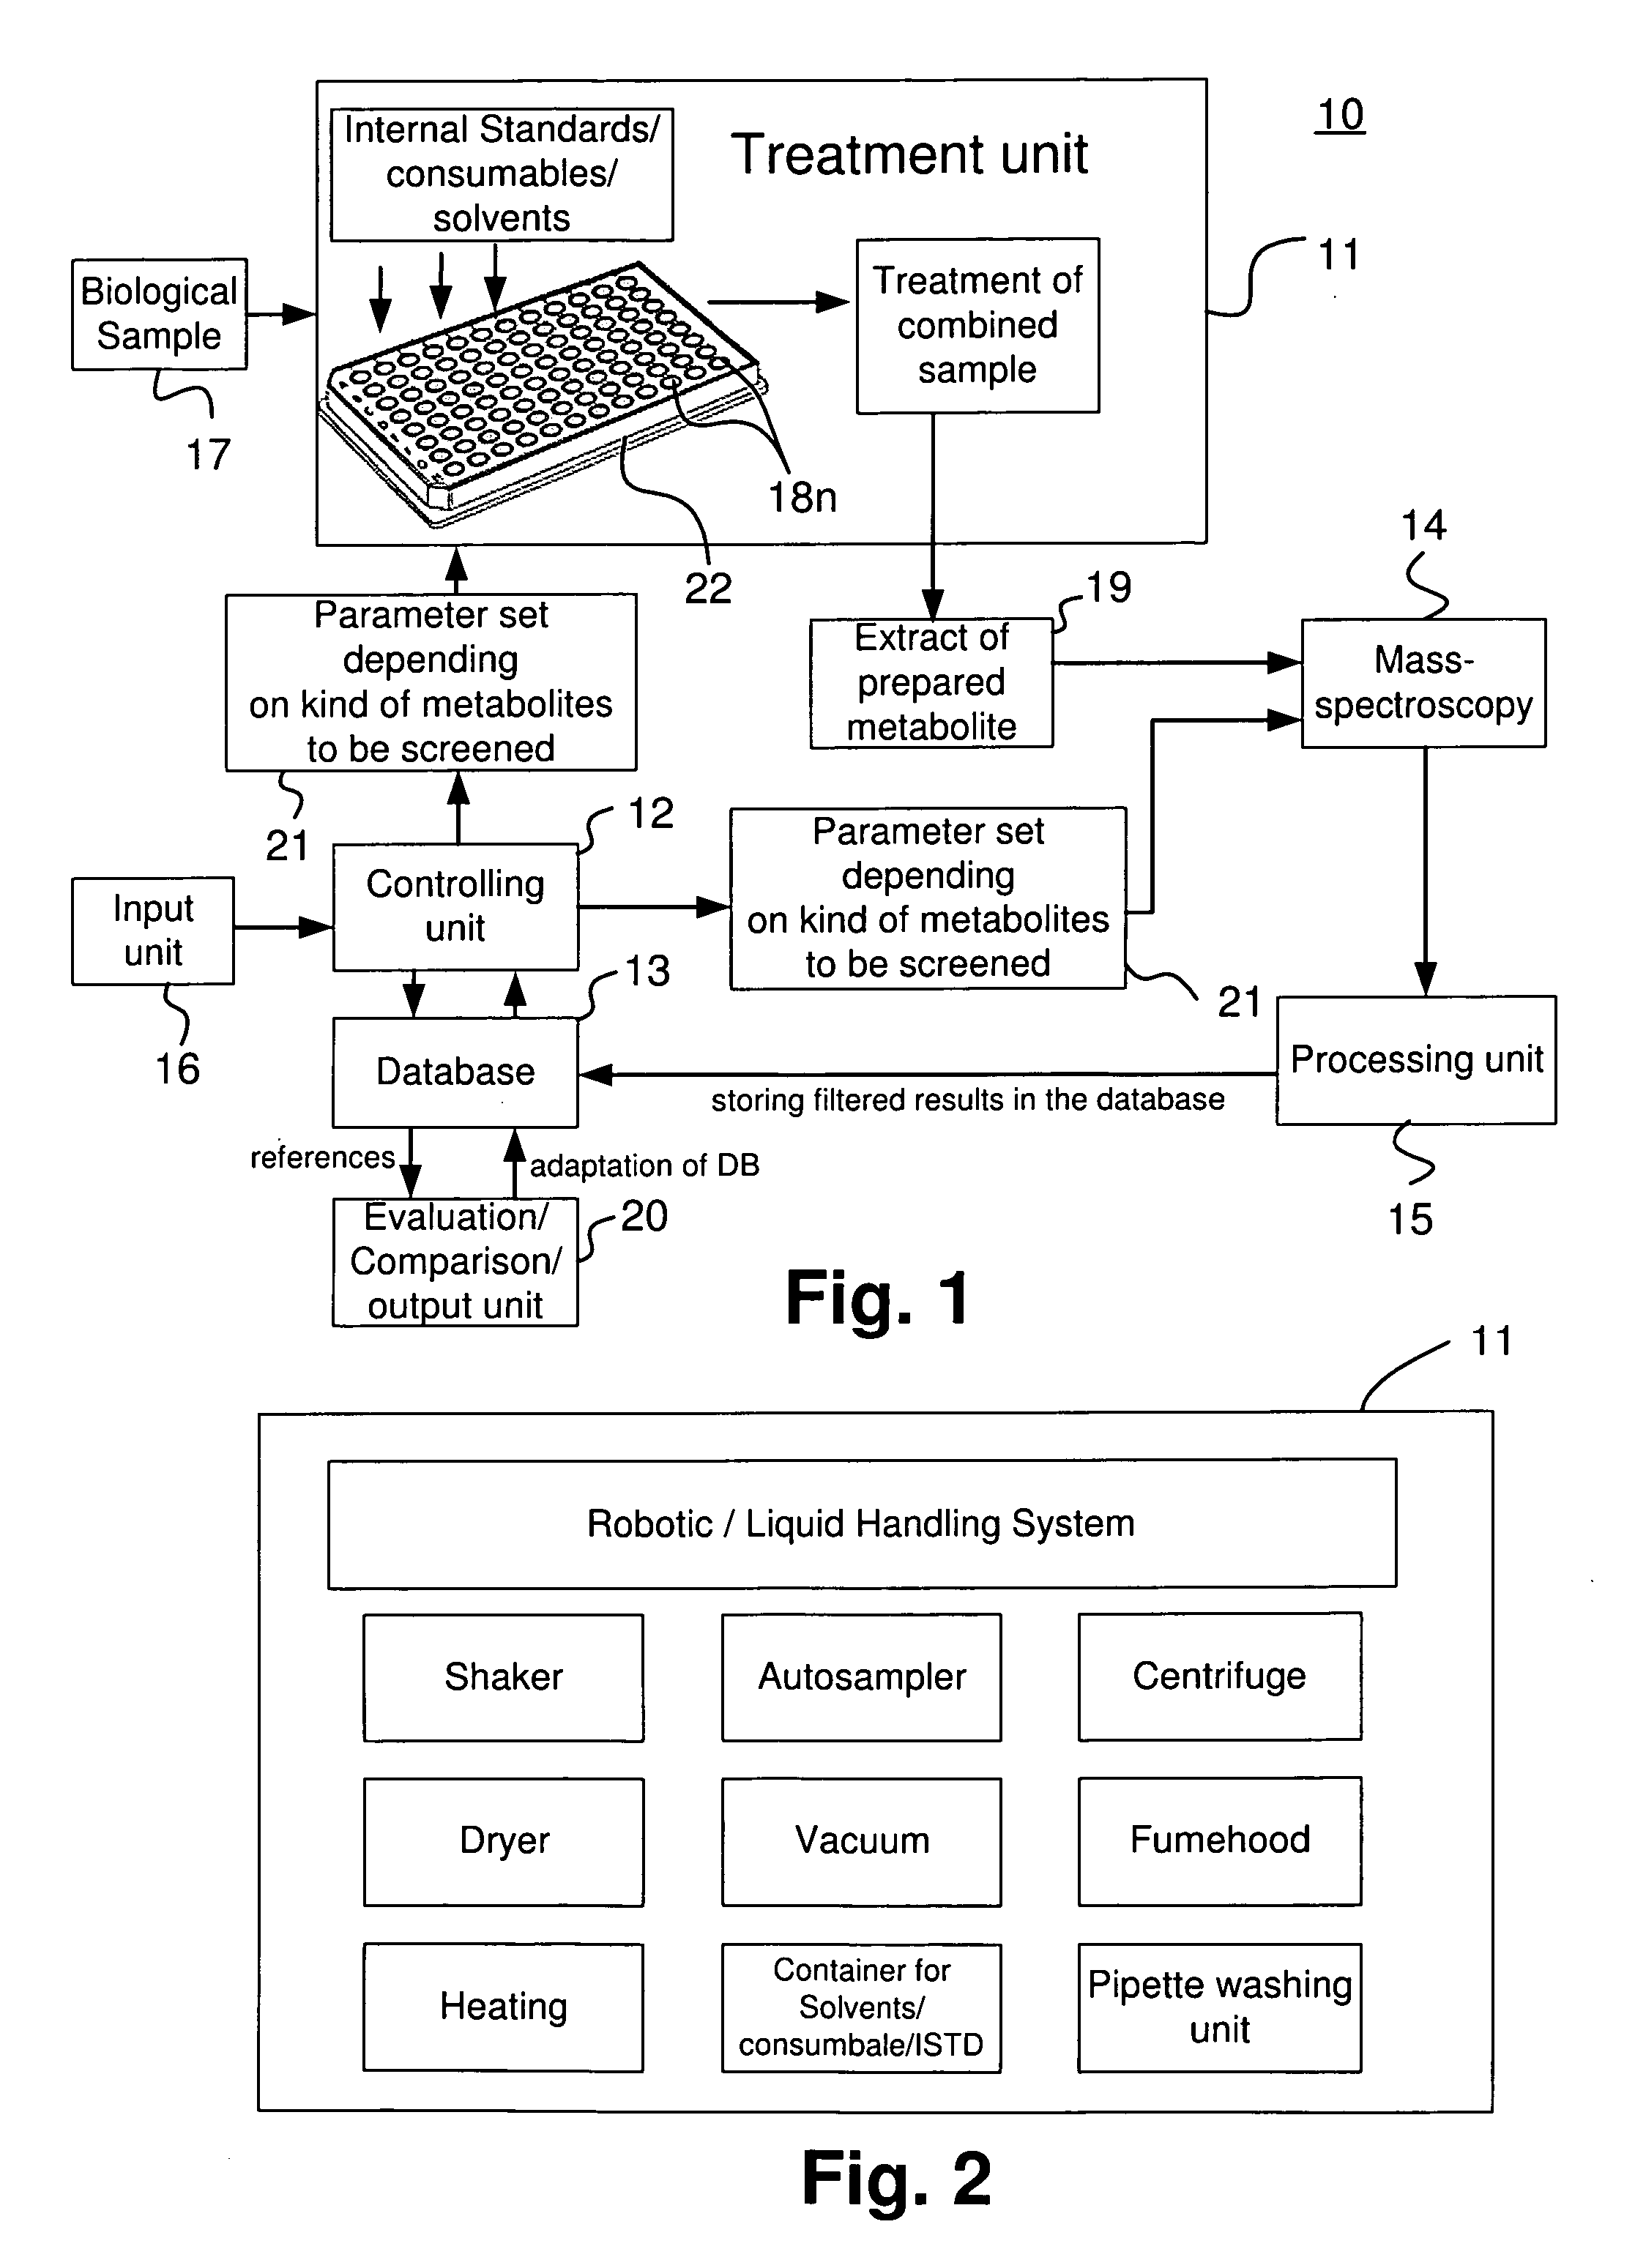 Apparatus and method for analyzing a metabolite profile